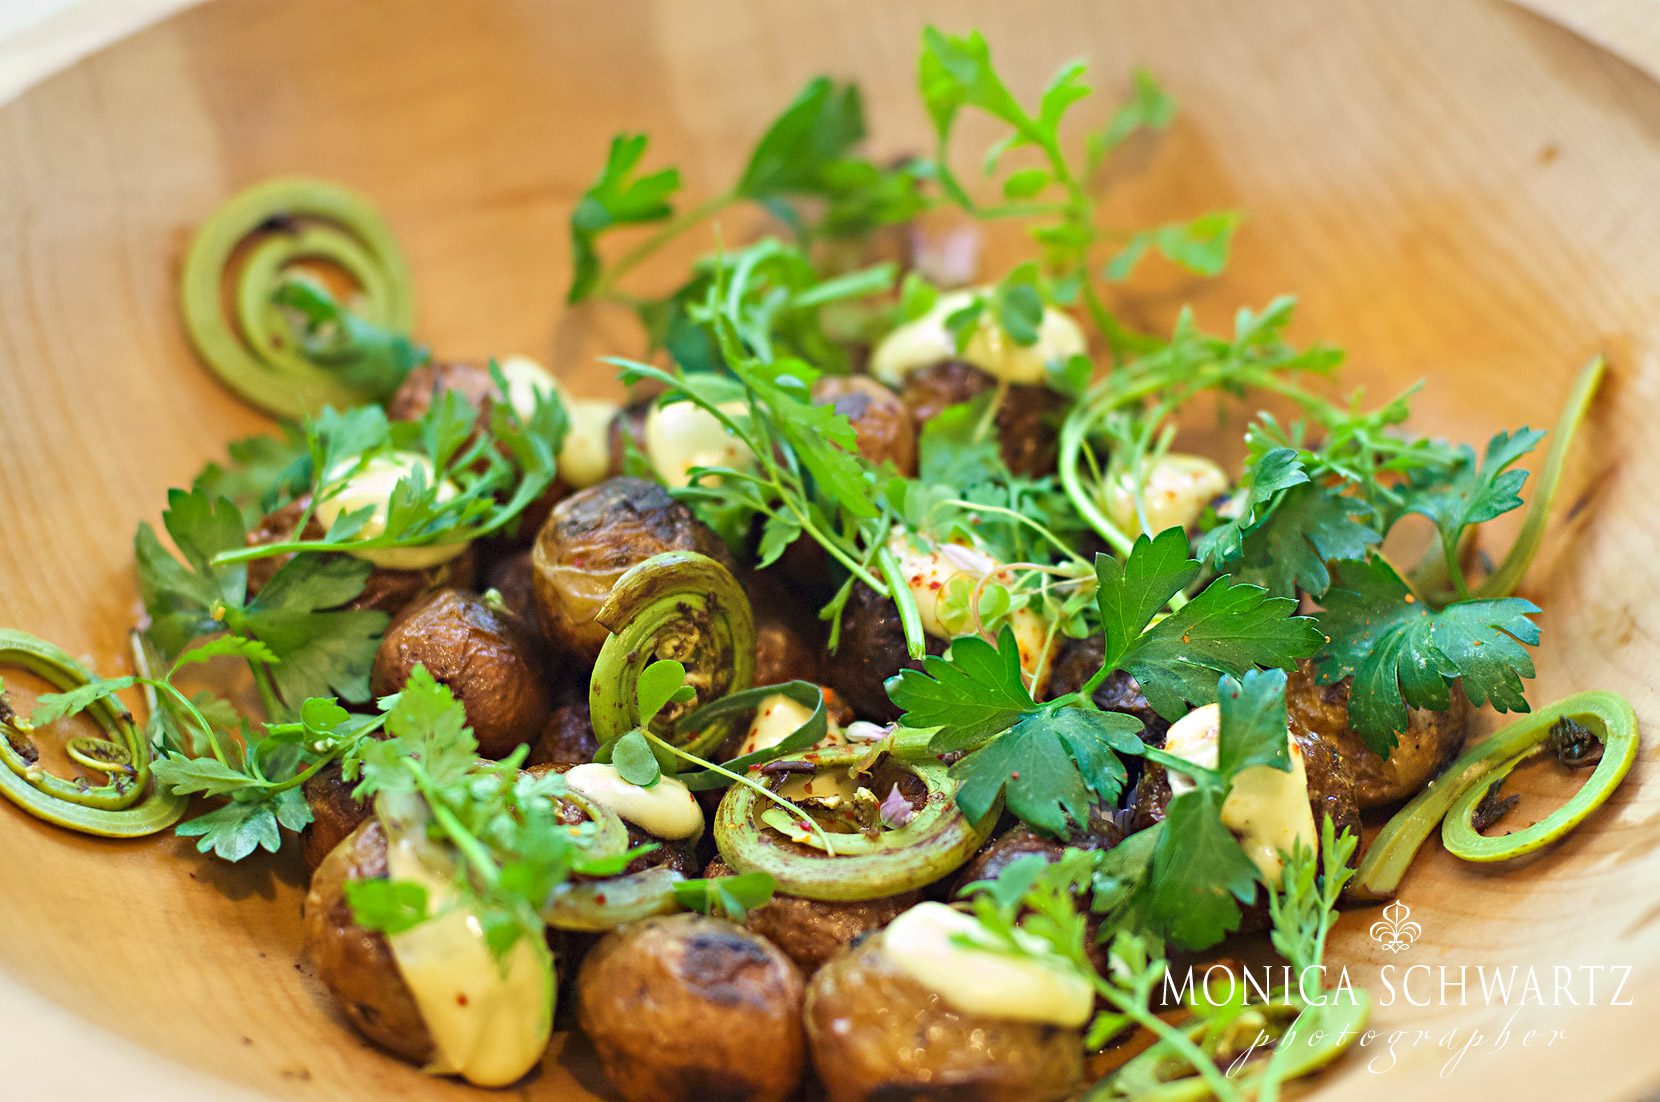 Roasted-Potatoes-and-Fiddlehead-Ferns-with-Green-Garlic-Aioli-and-Fines-Herbes-at-the-Shed-in-Healdsburg-California